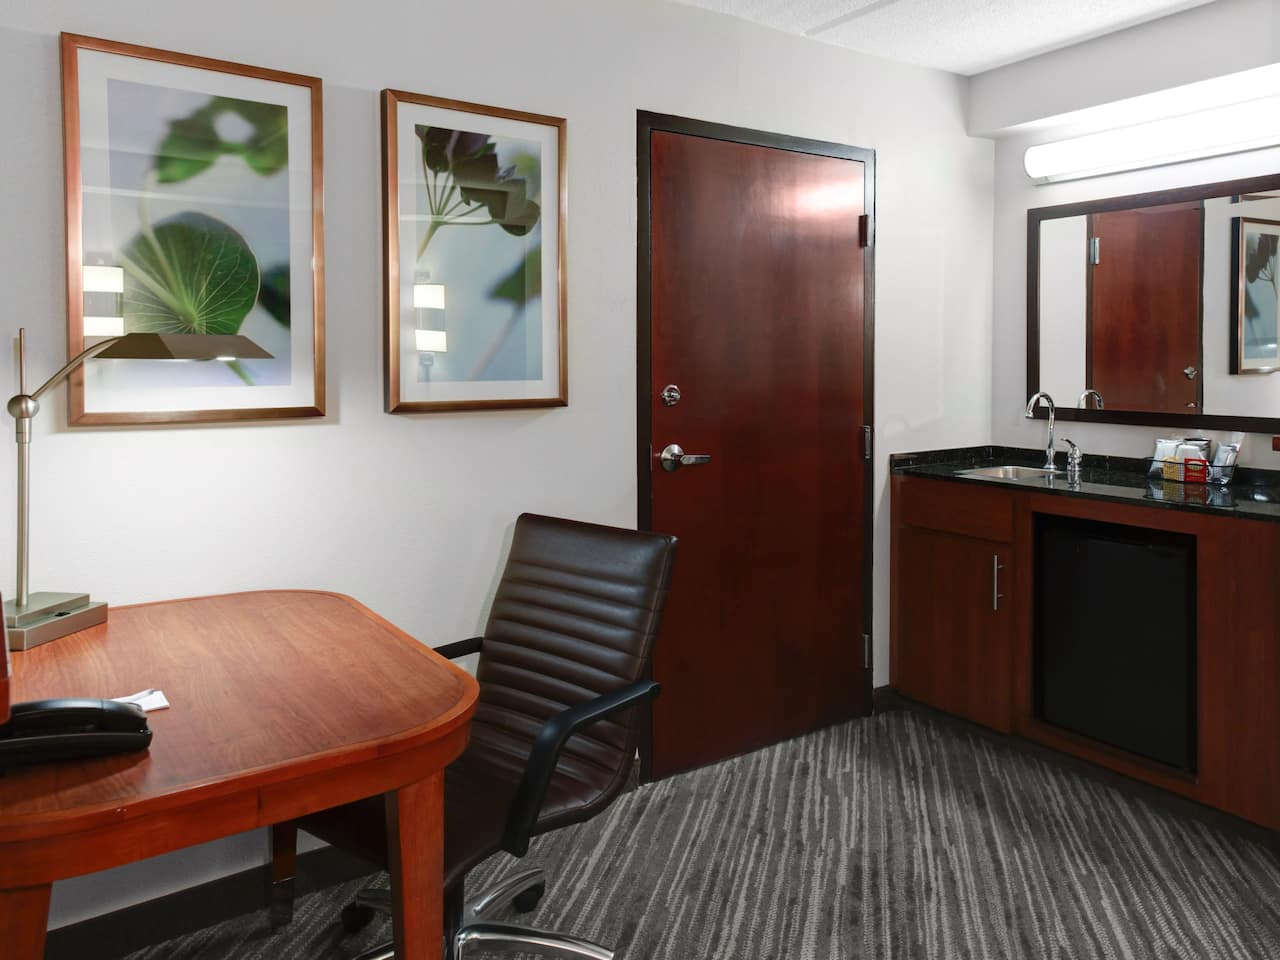 Hotel Rooms Near OKC Airport with Guestroom Desk and Wet Bar at Hyatt Place Oklahoma City Airport